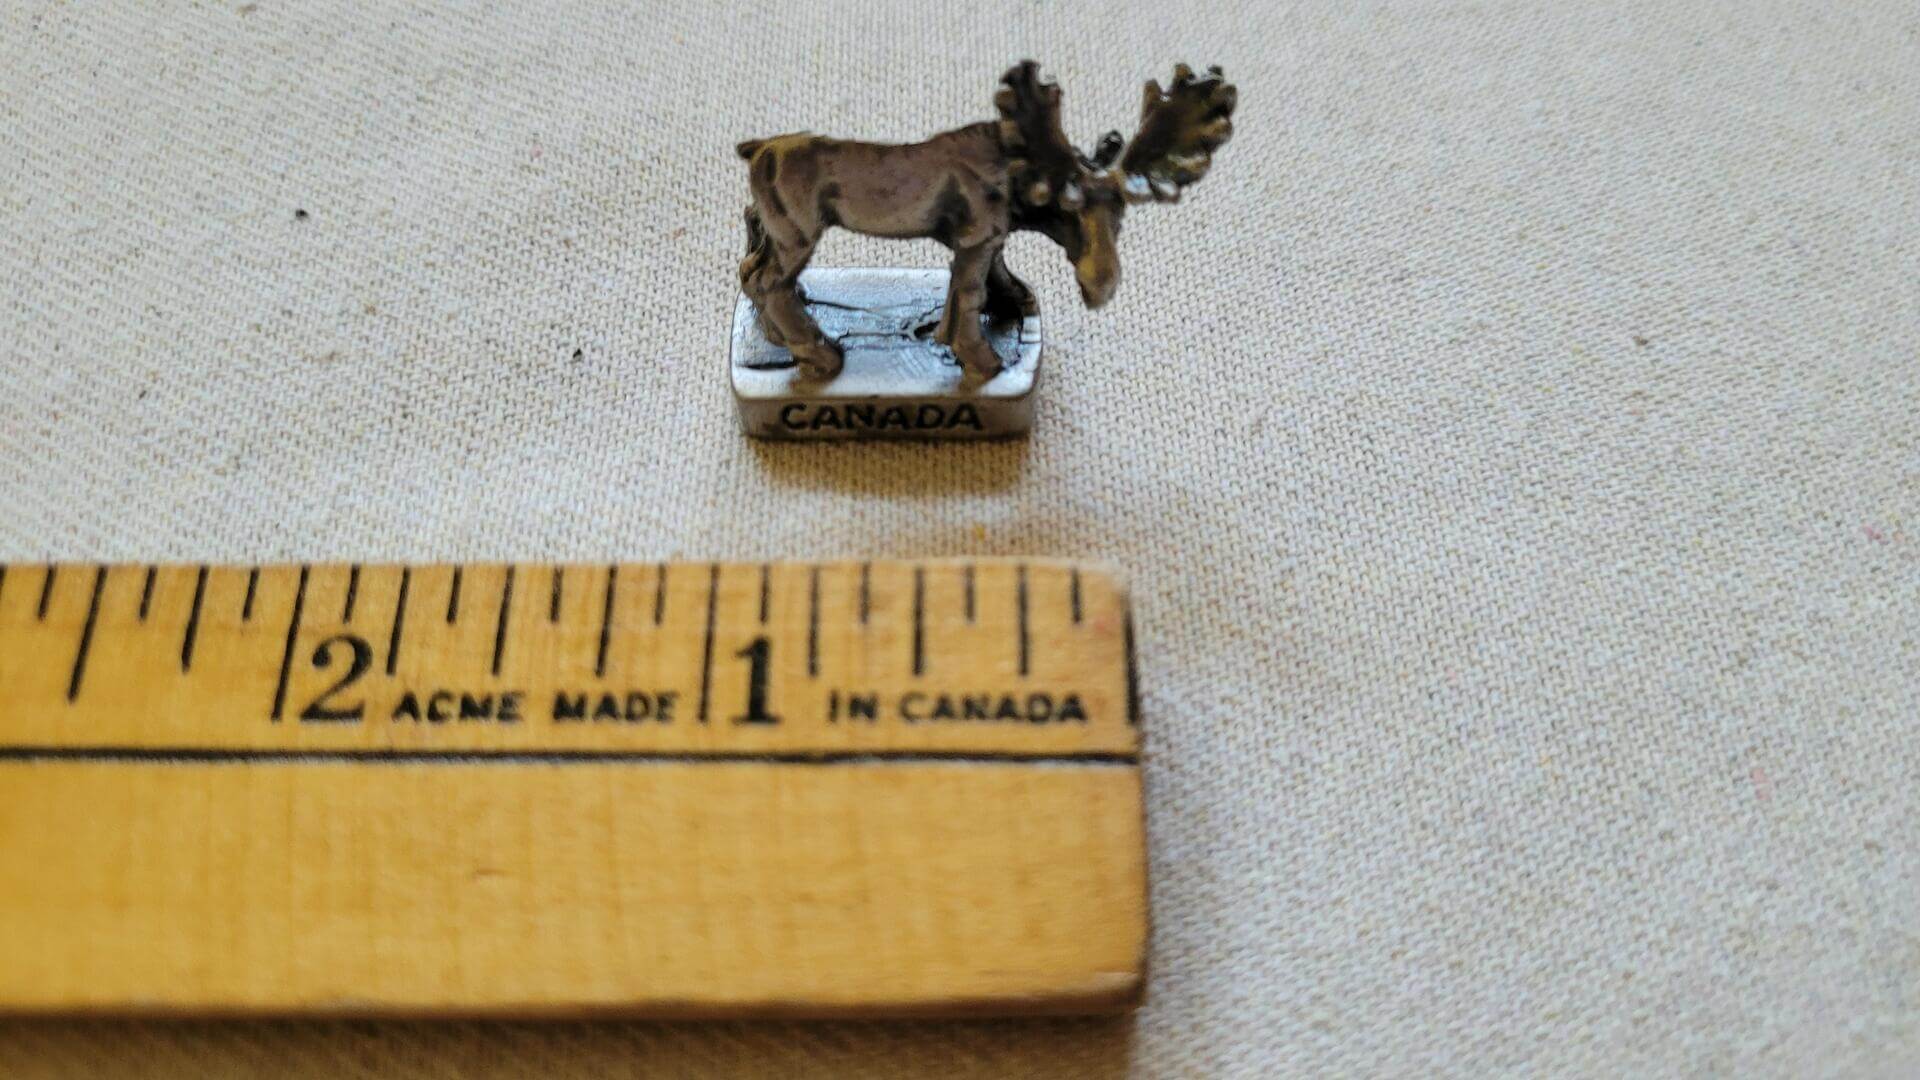 Miniature vintage pewter casting moose figurine sculpture one inch small with Canada engraving on the base